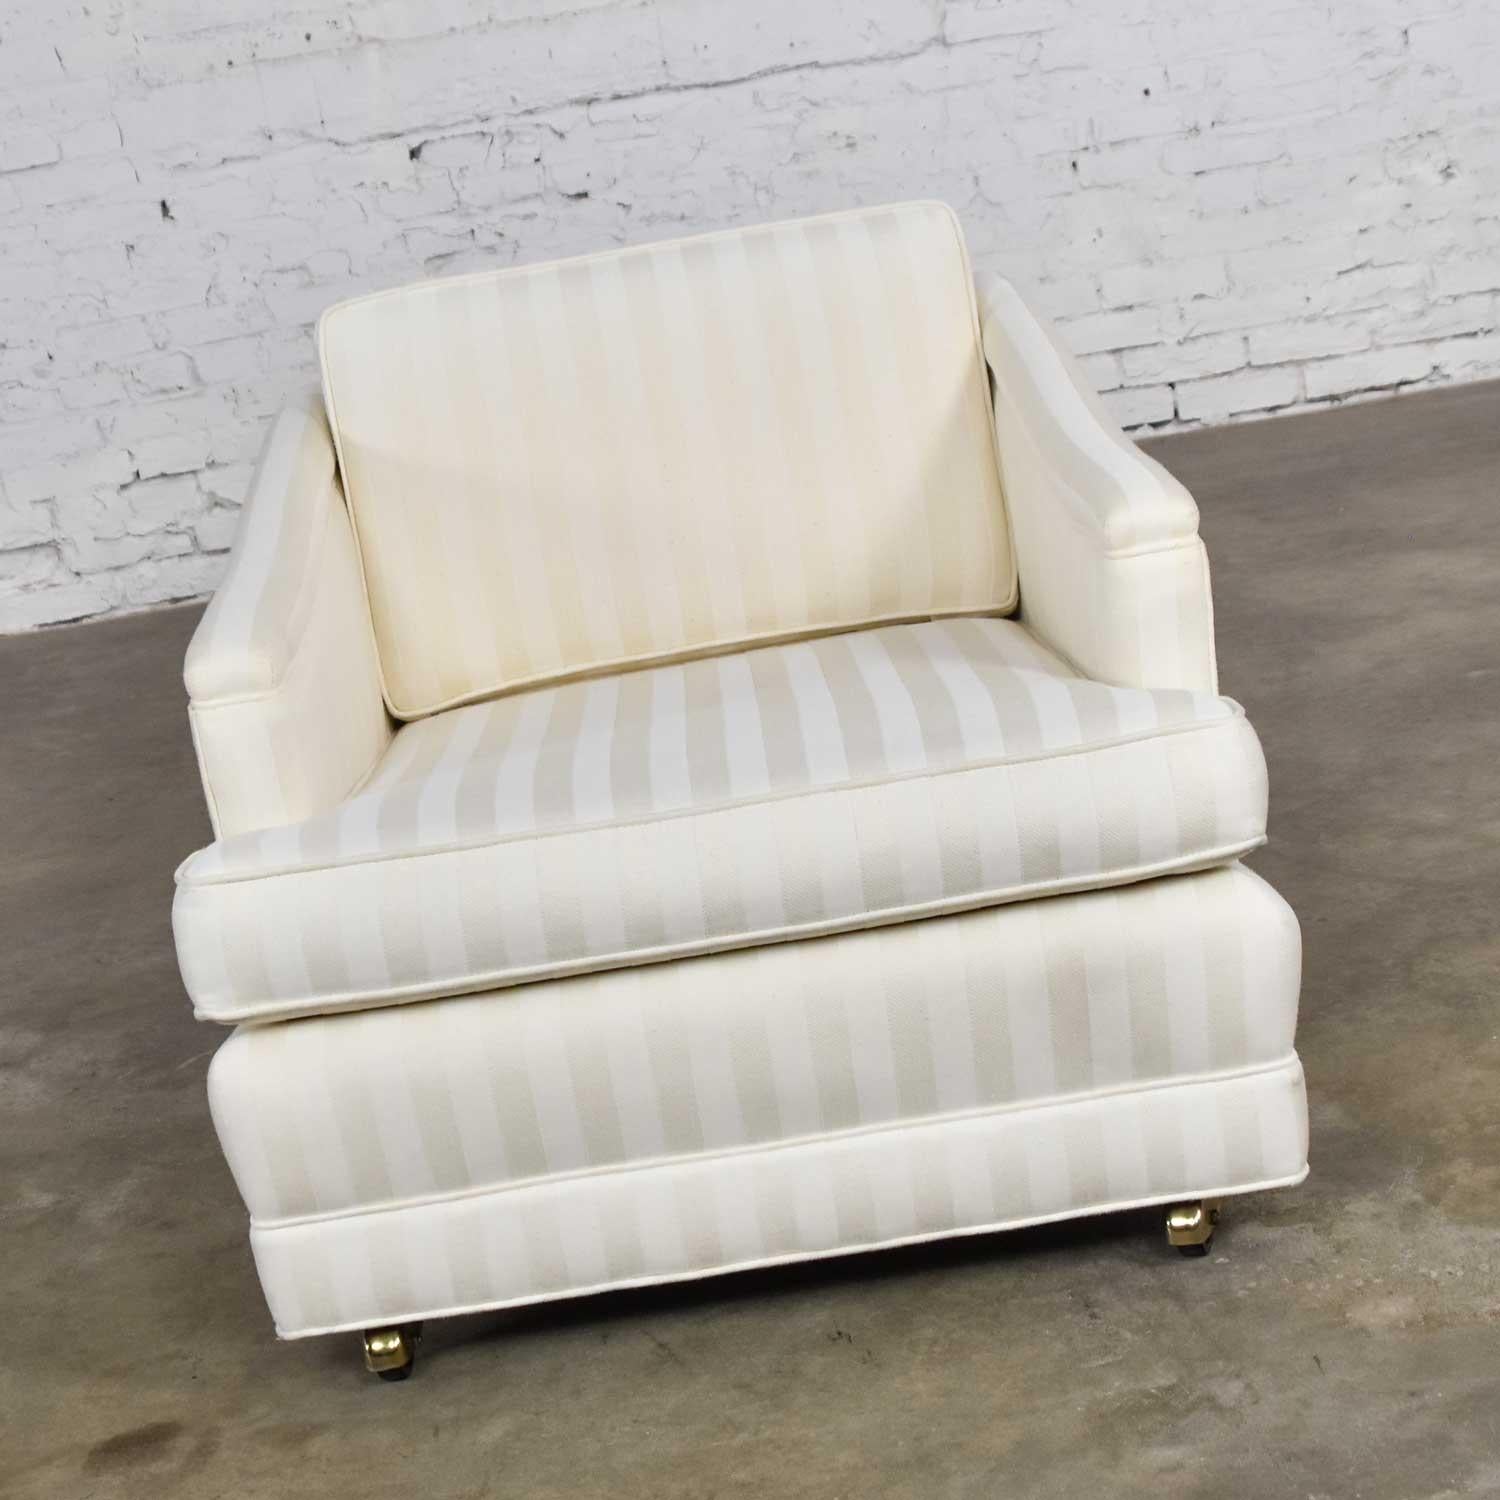 American Mid-Century Modern Off White Tone on Tone Stripe Lounge Chair on Rolling Casters For Sale